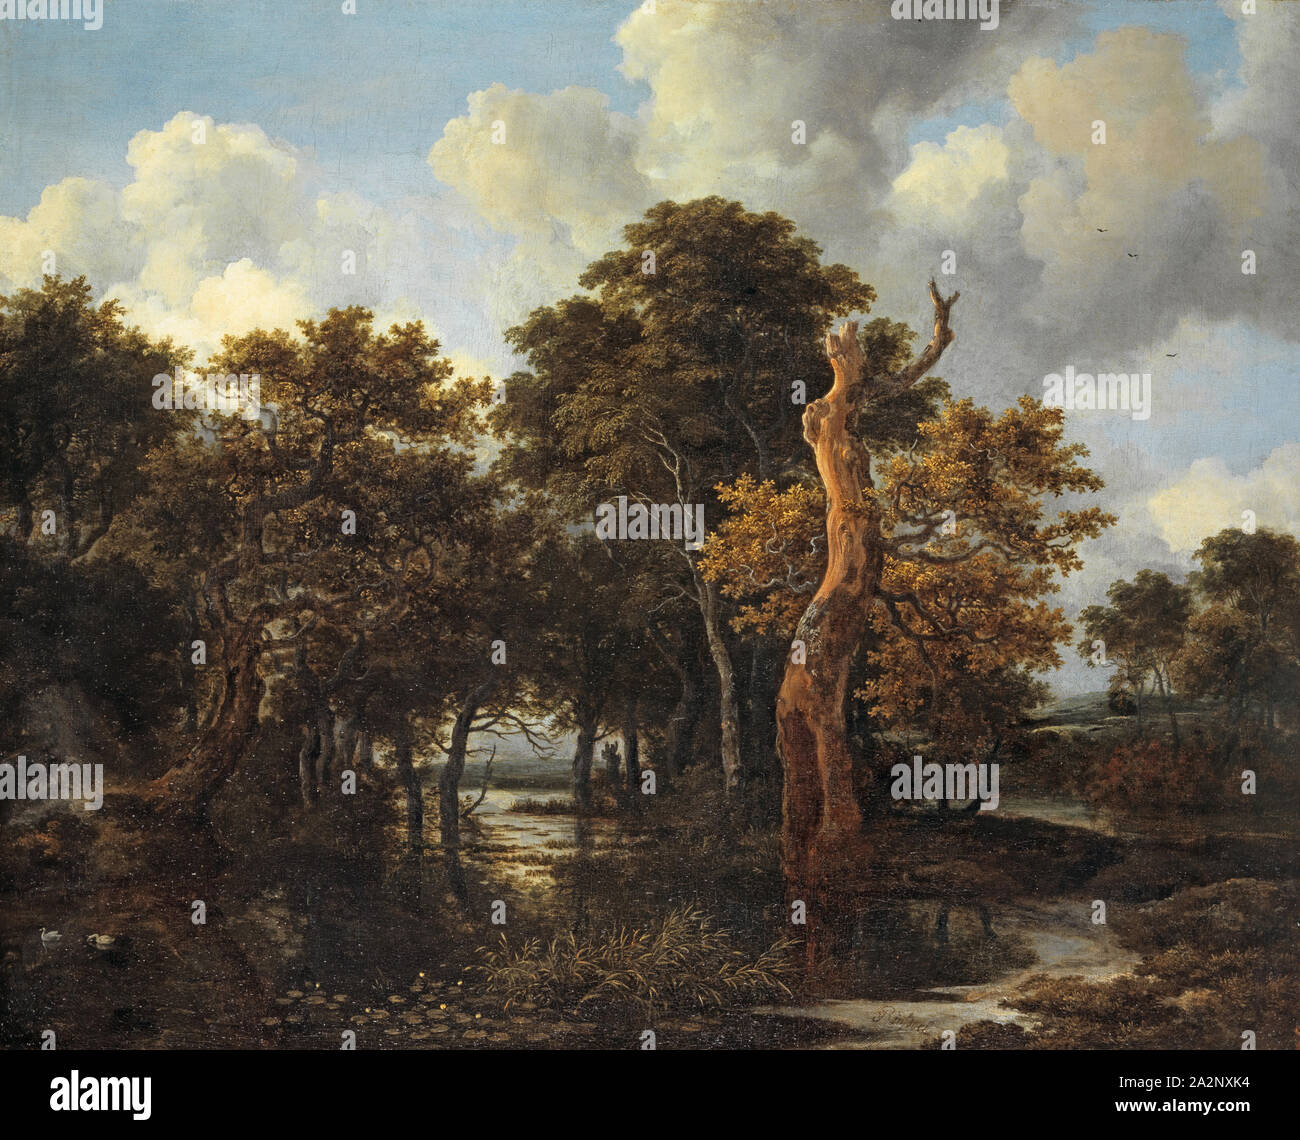 Woody swampy landscape with dead tree, c. 1665, oil on canvas, 59.9 x 74.2 cm, signed lower middle right: vRuisdael [v and R ligated], Jacob Isaacksz. van Ruisdael, Haarlem 1628/29–1682 Amsterdam Stock Photo